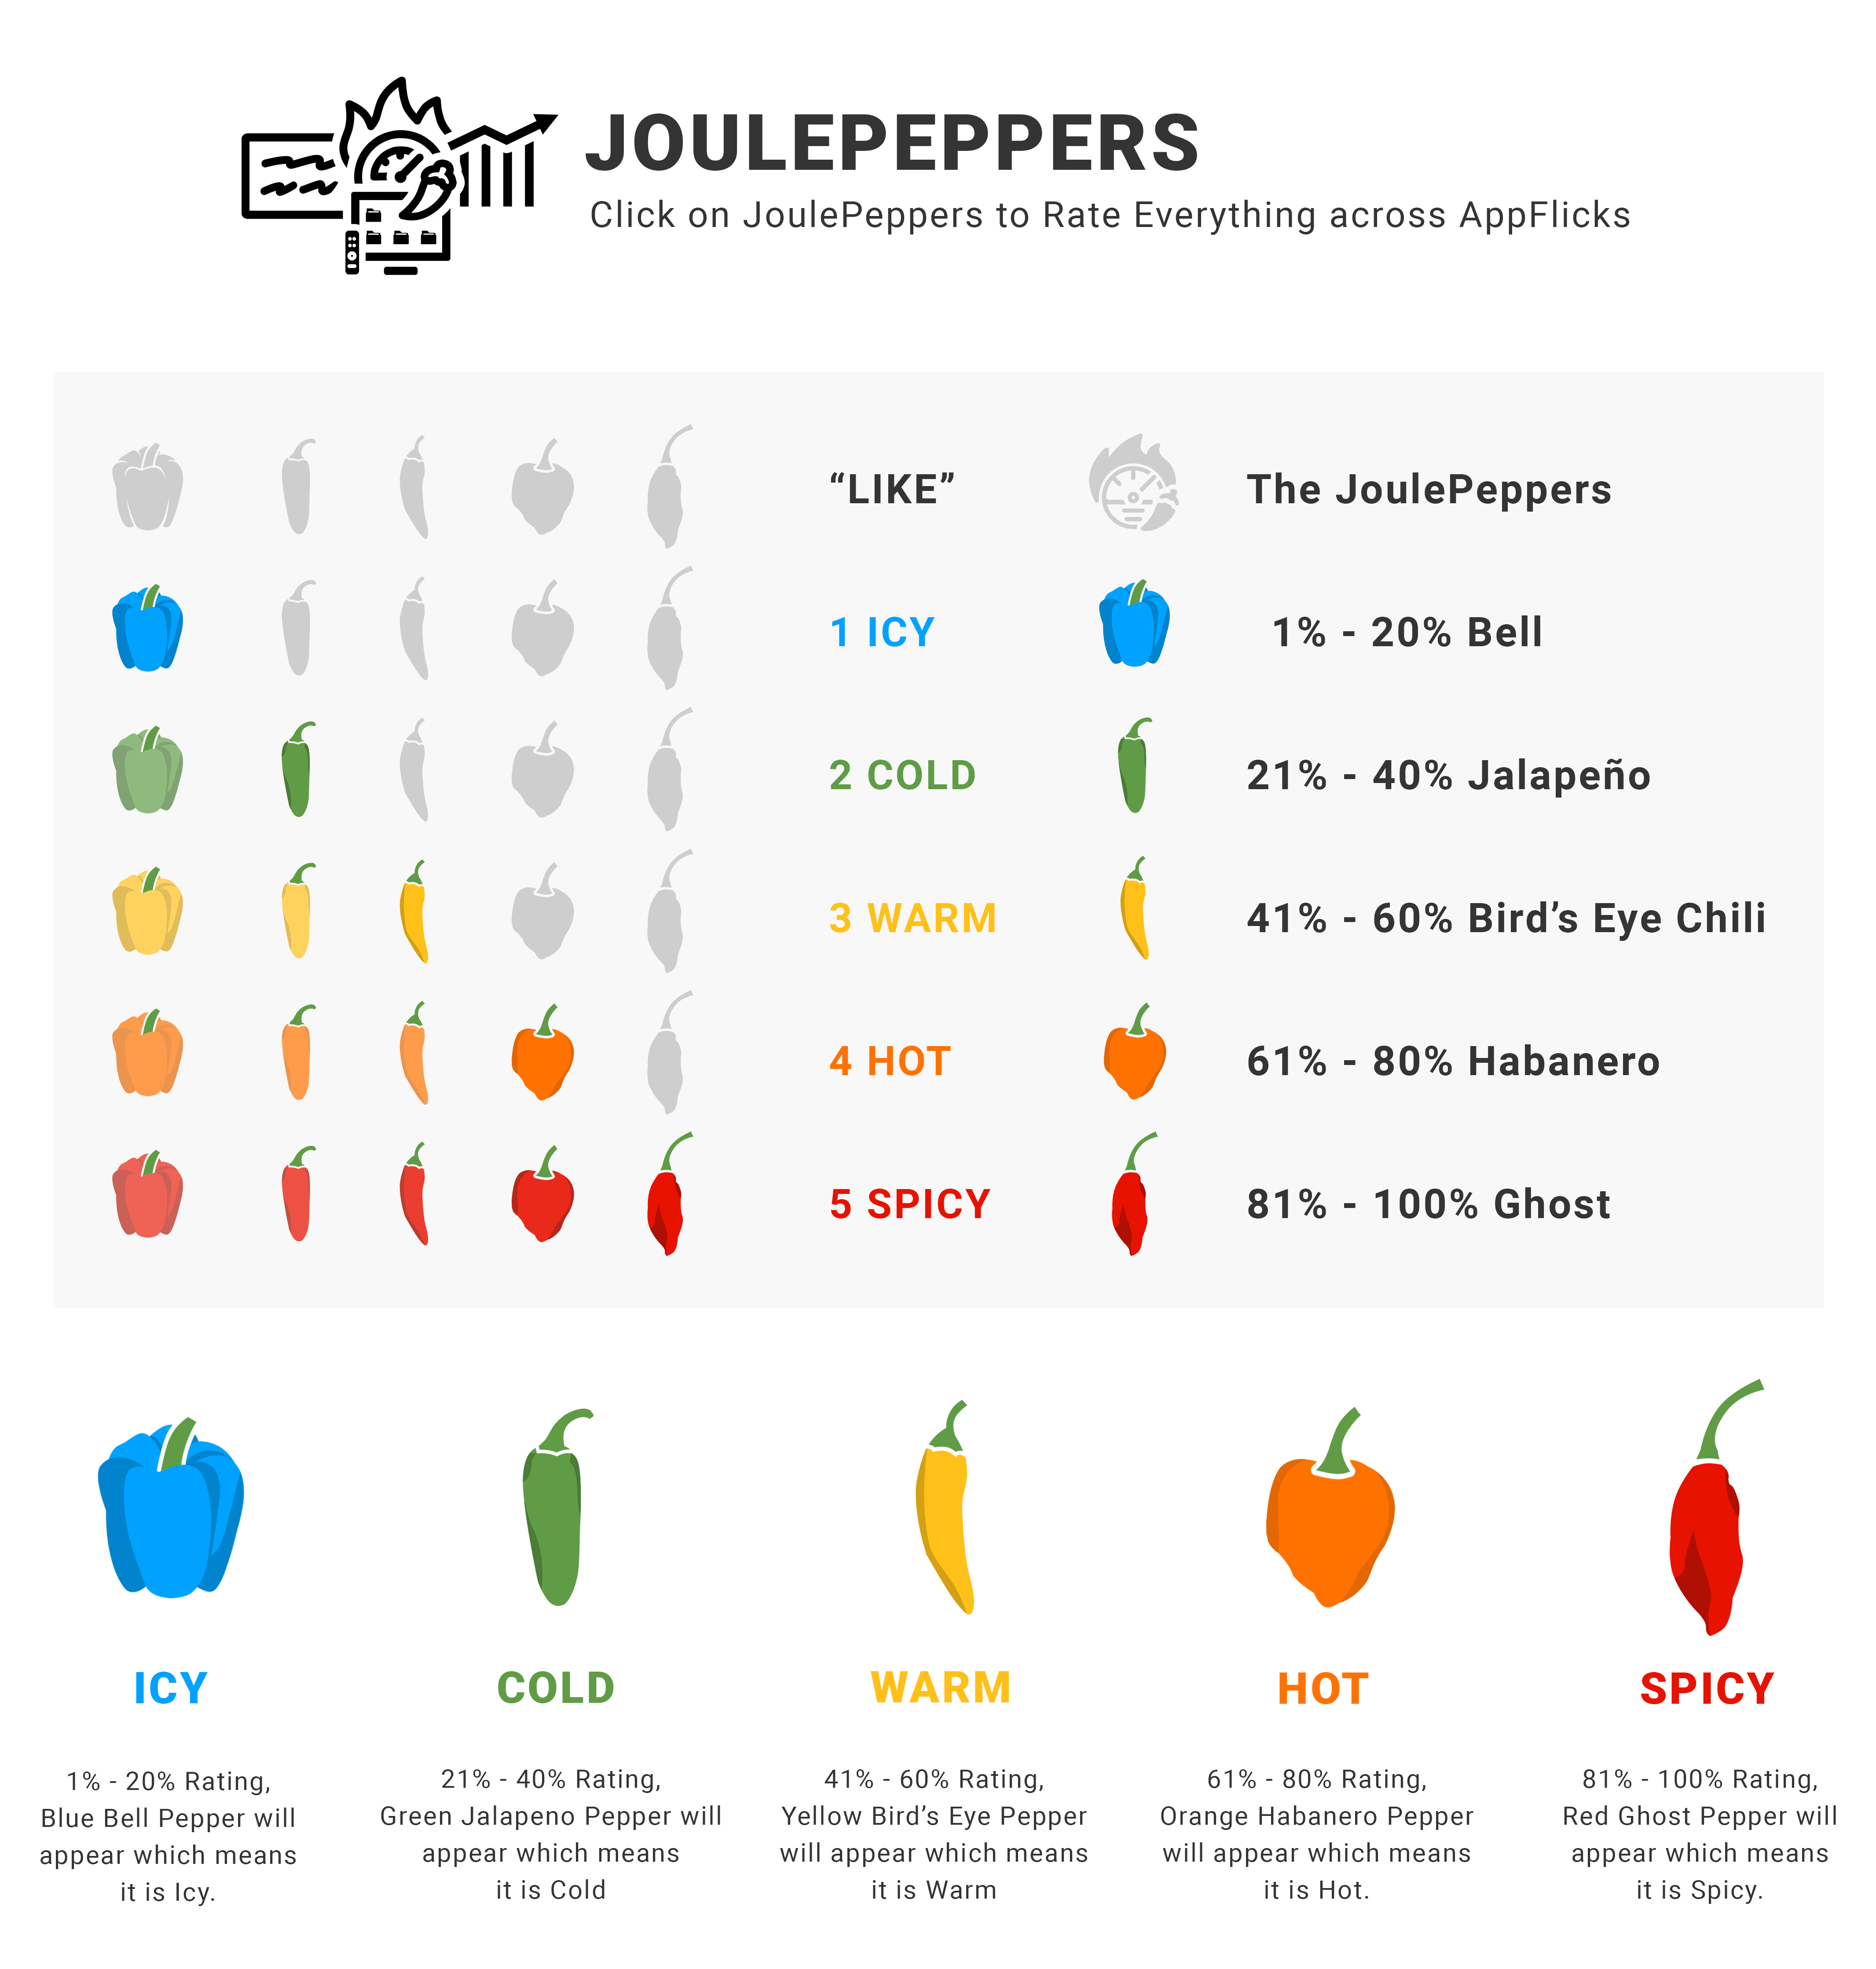 CineJoule: The JoulePeppers